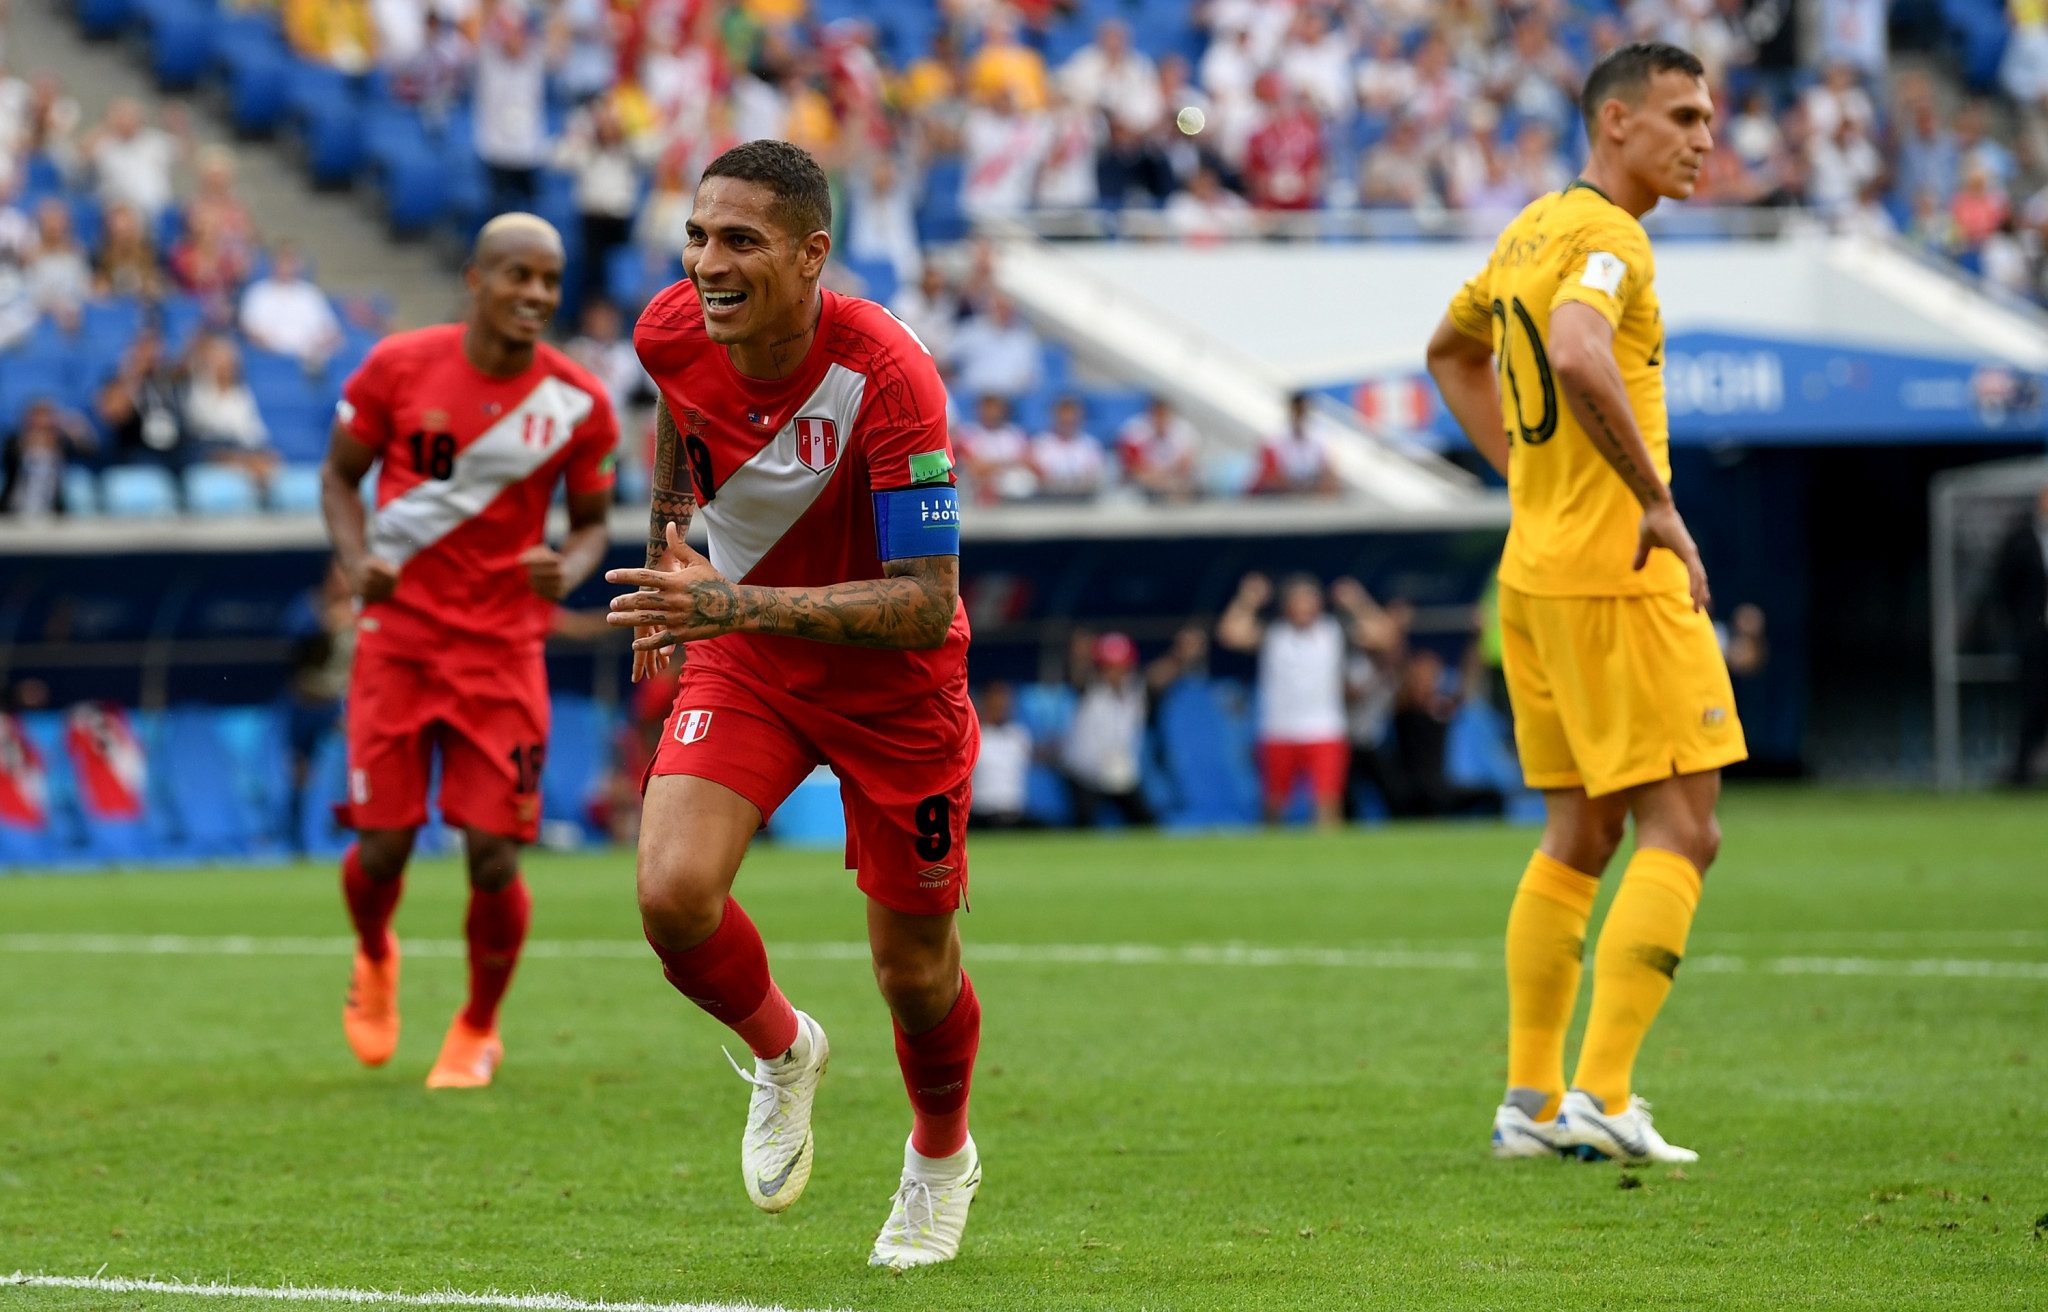 Paolo Guerrero will not be able to return for either club or country until early next month ©Getty Images